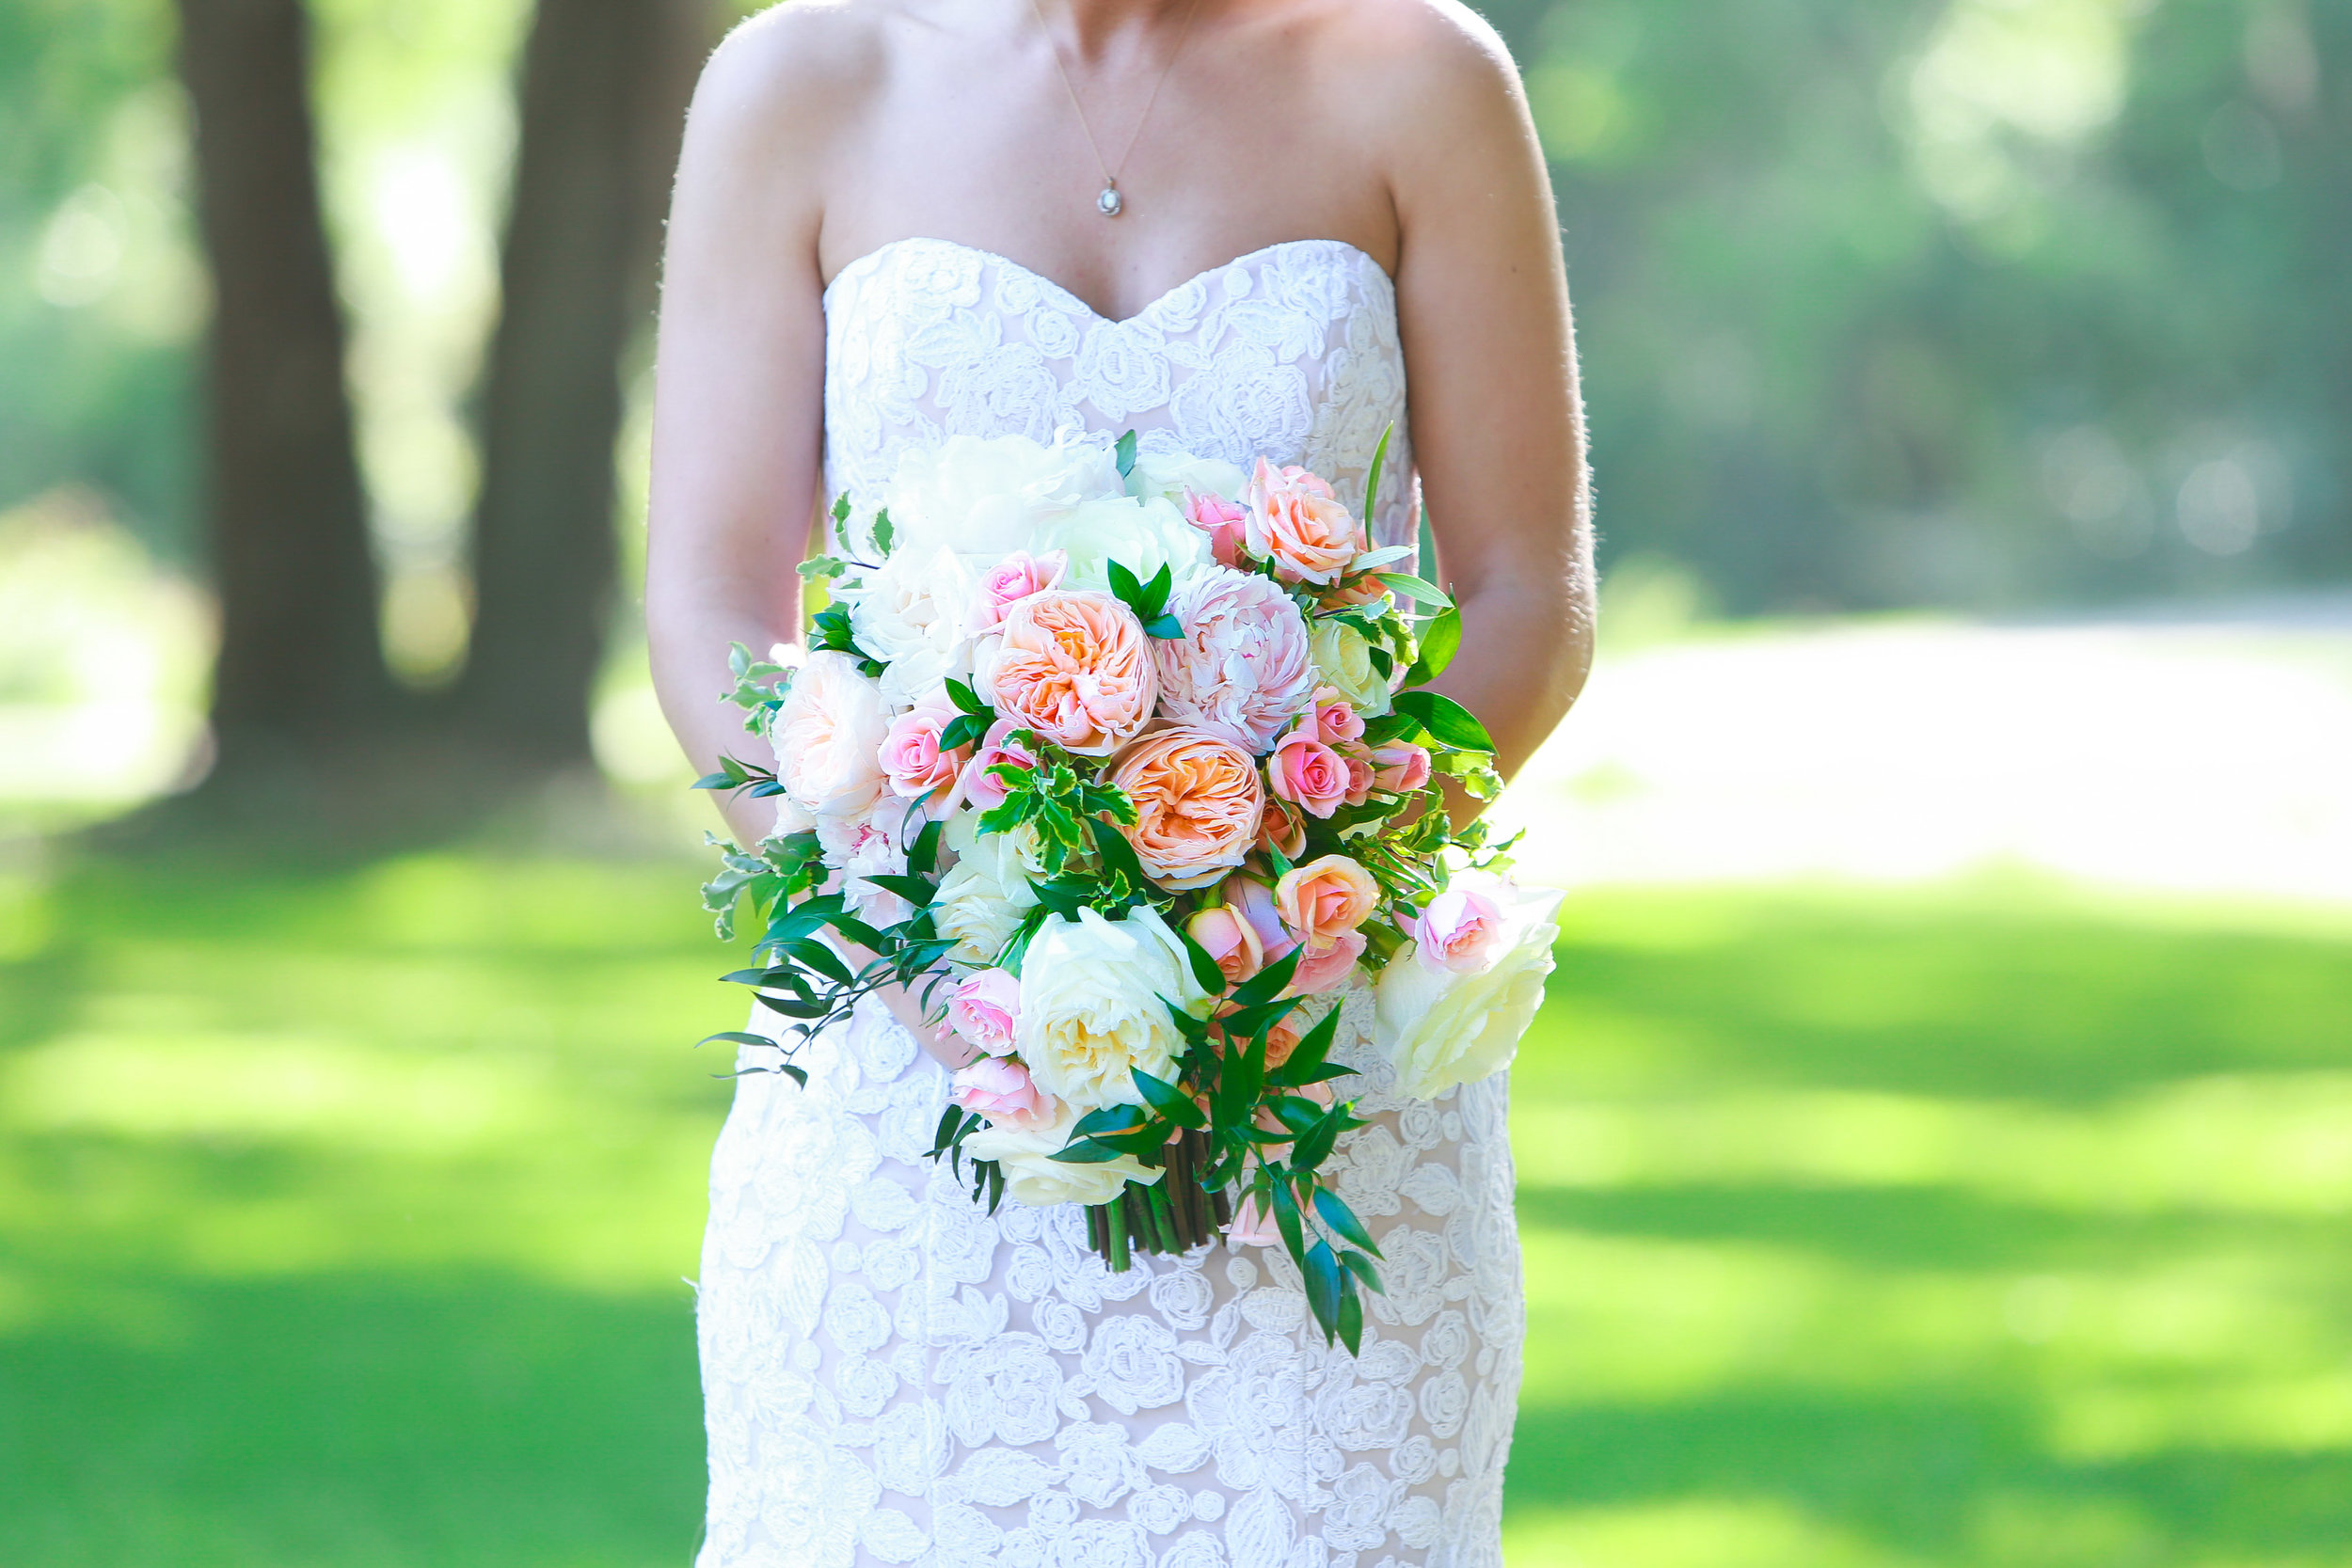  Beautiful pink and white rose bouquet being held by a bride 